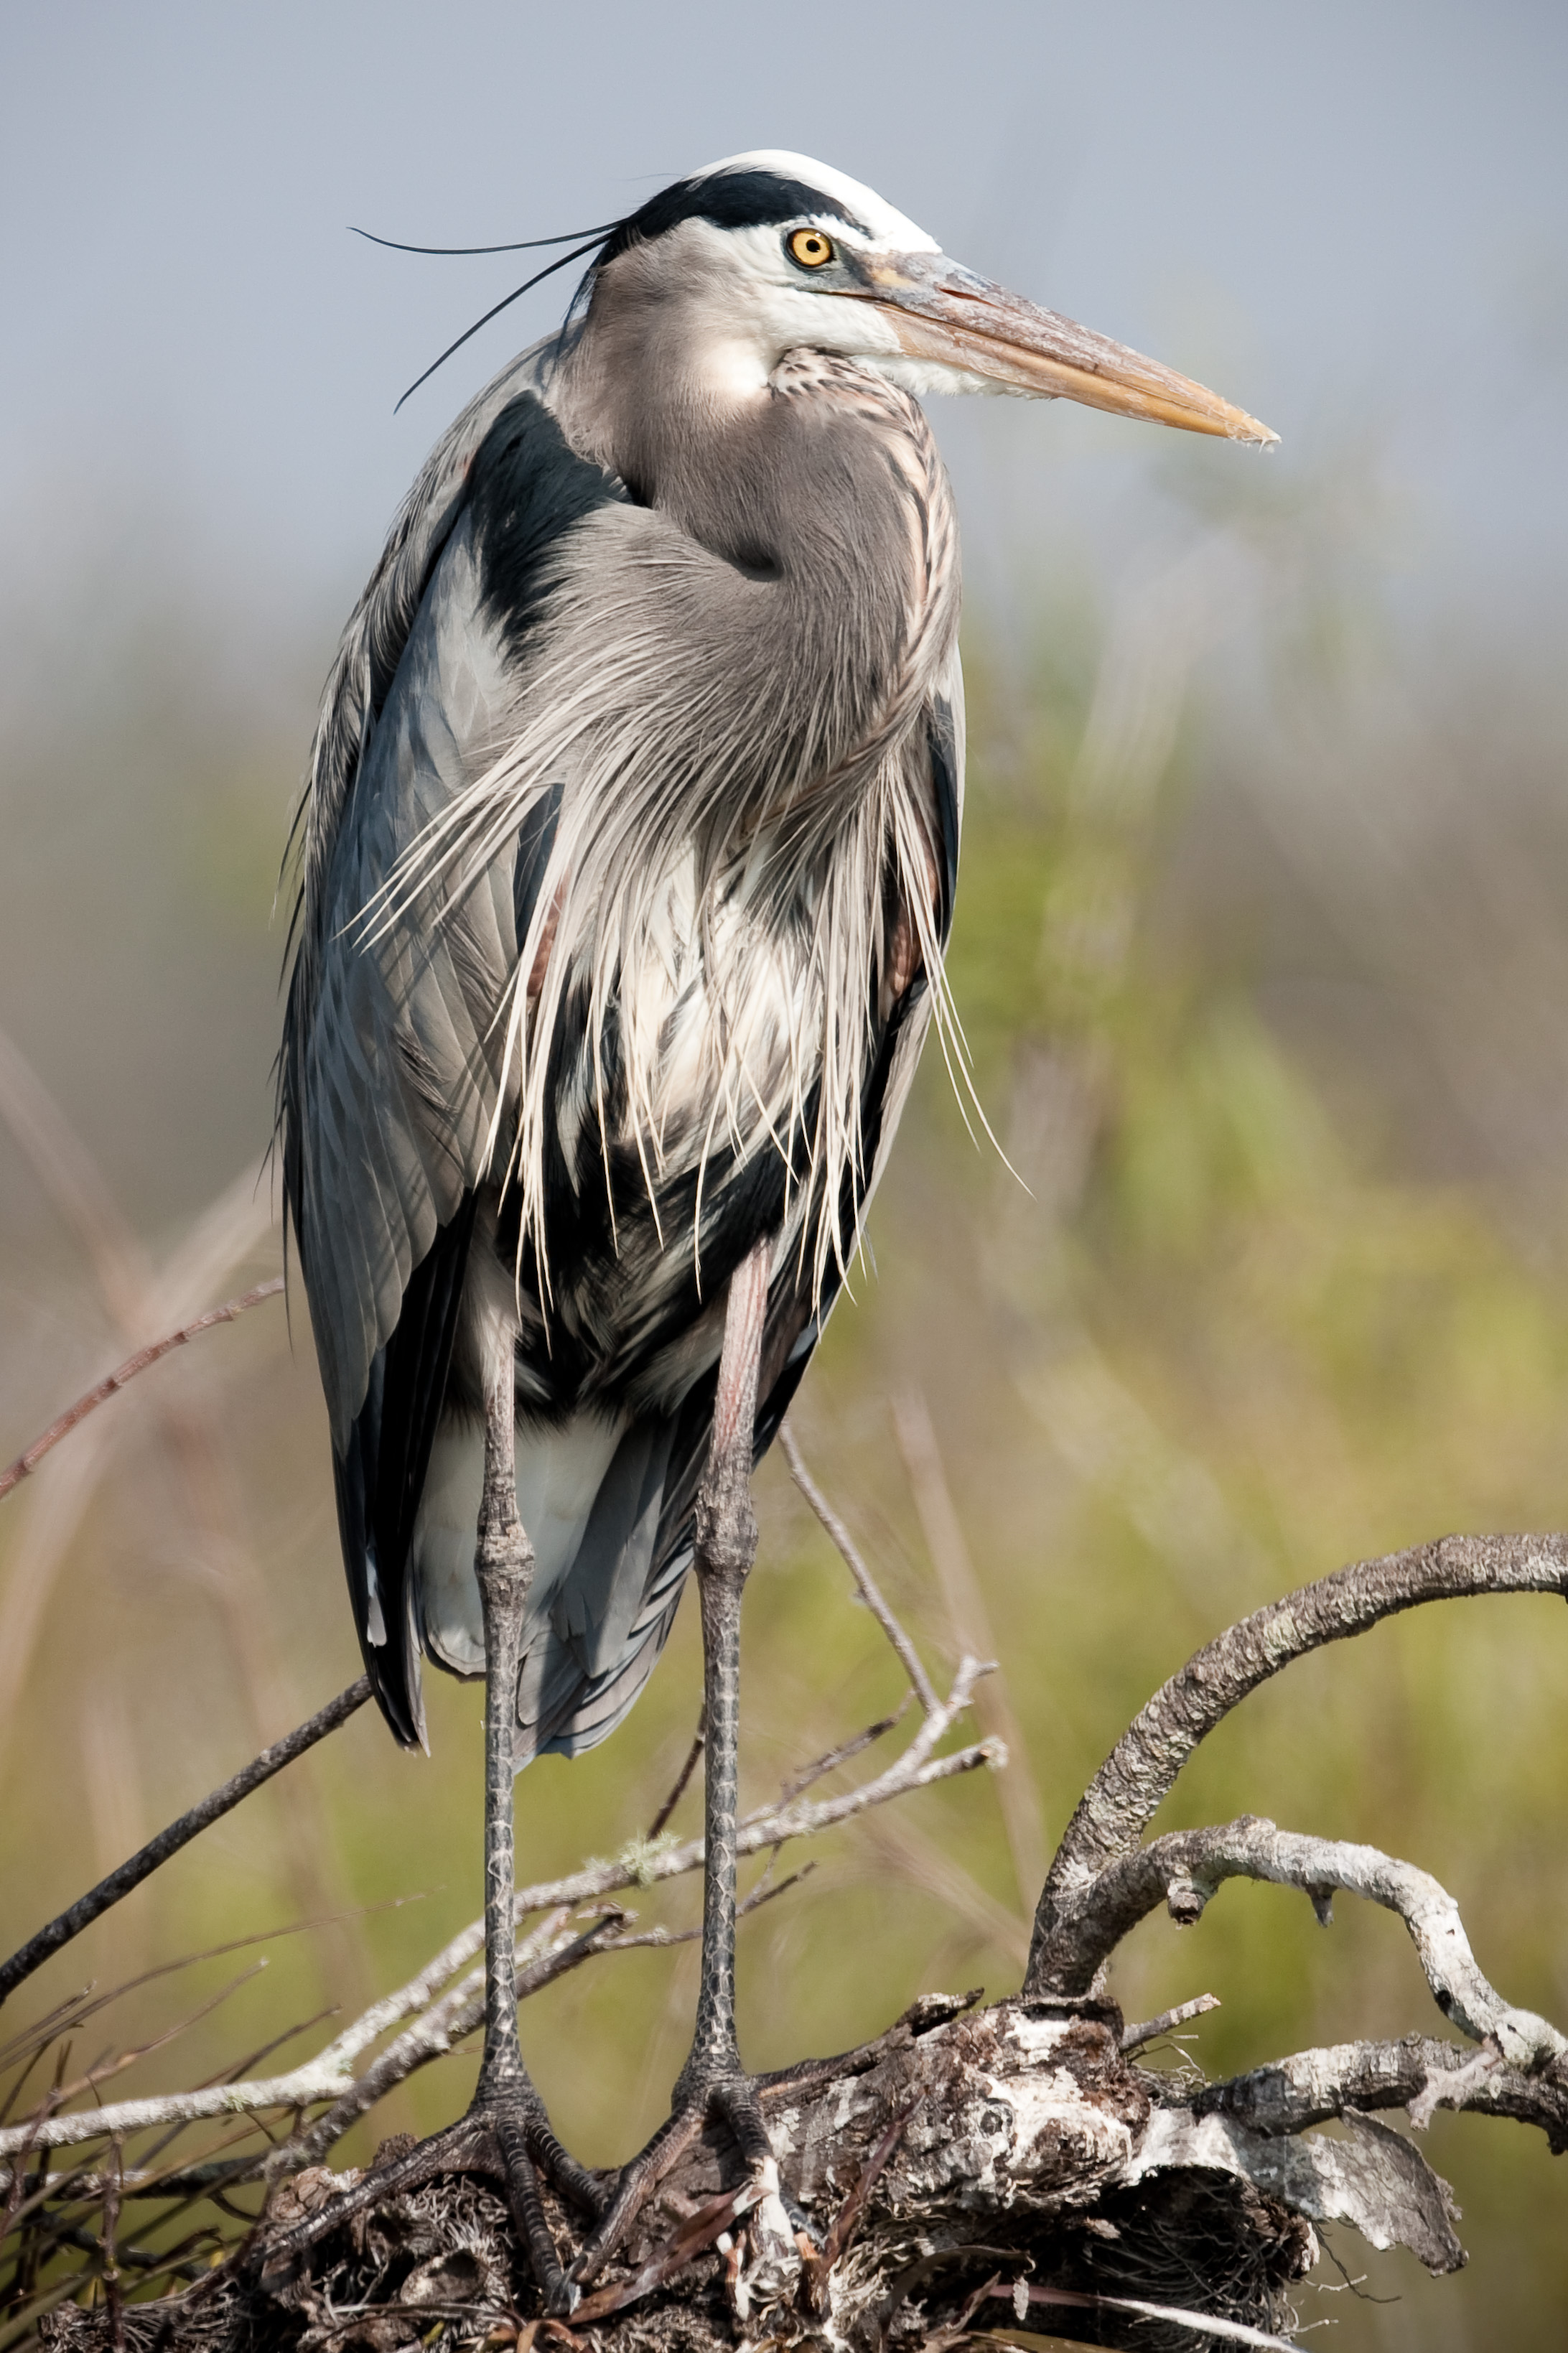 A great blue heron enjoys the expansive watery habitat of Everglades National Park. Photo by lubright via Flickr.